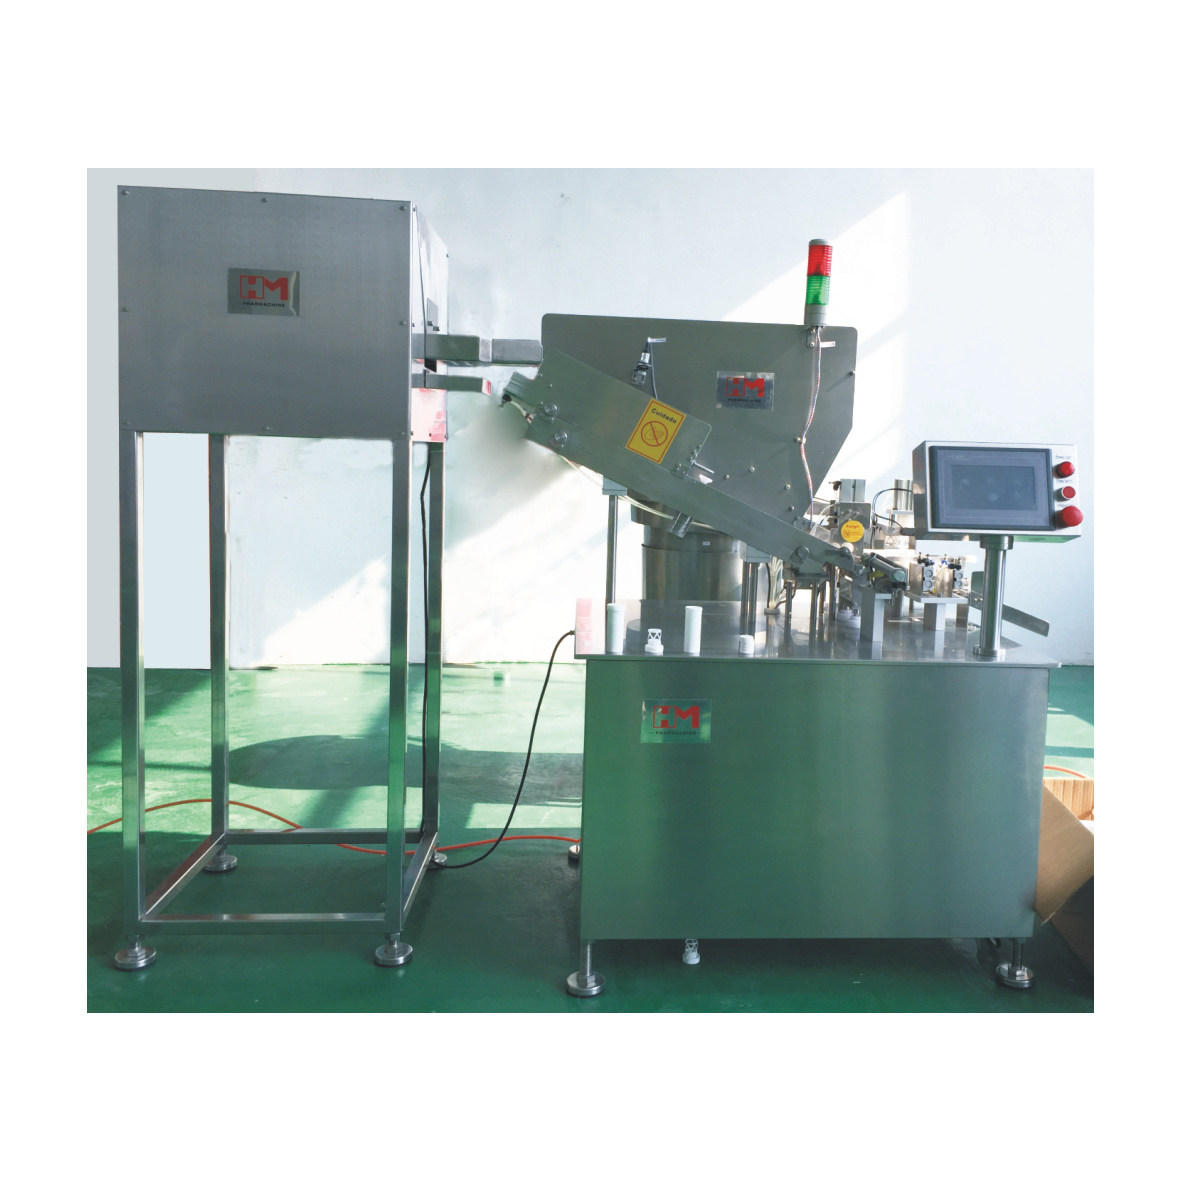 HM ETCP Series Effervescent Tablets Counting and Tube Packing Machine